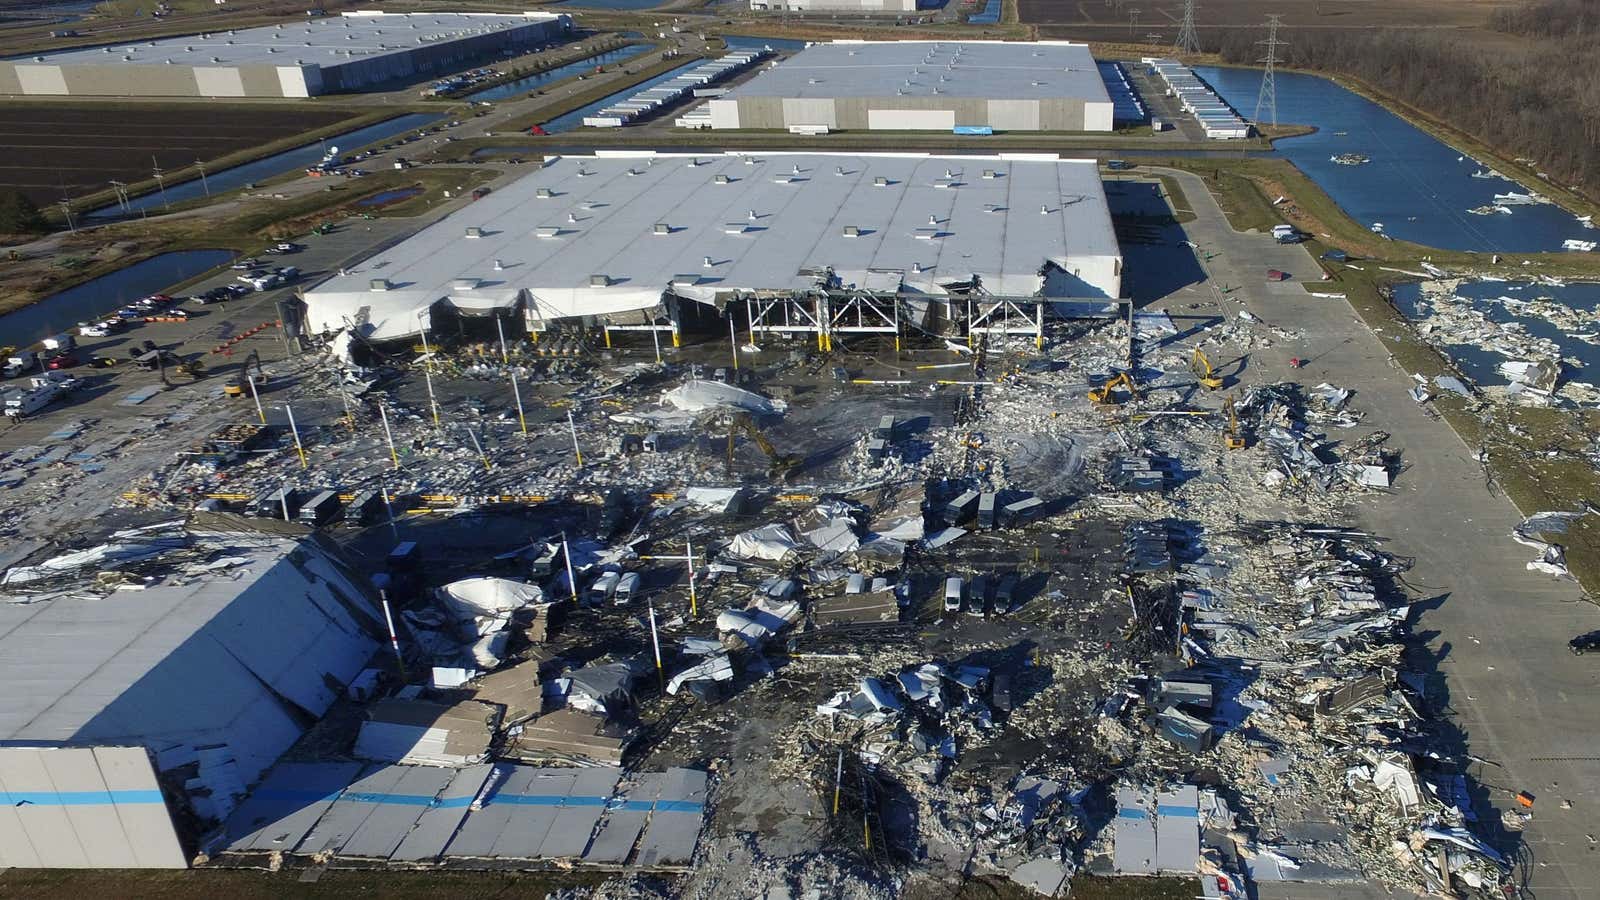 At least six people died after a tornado hit an Amazon facility.